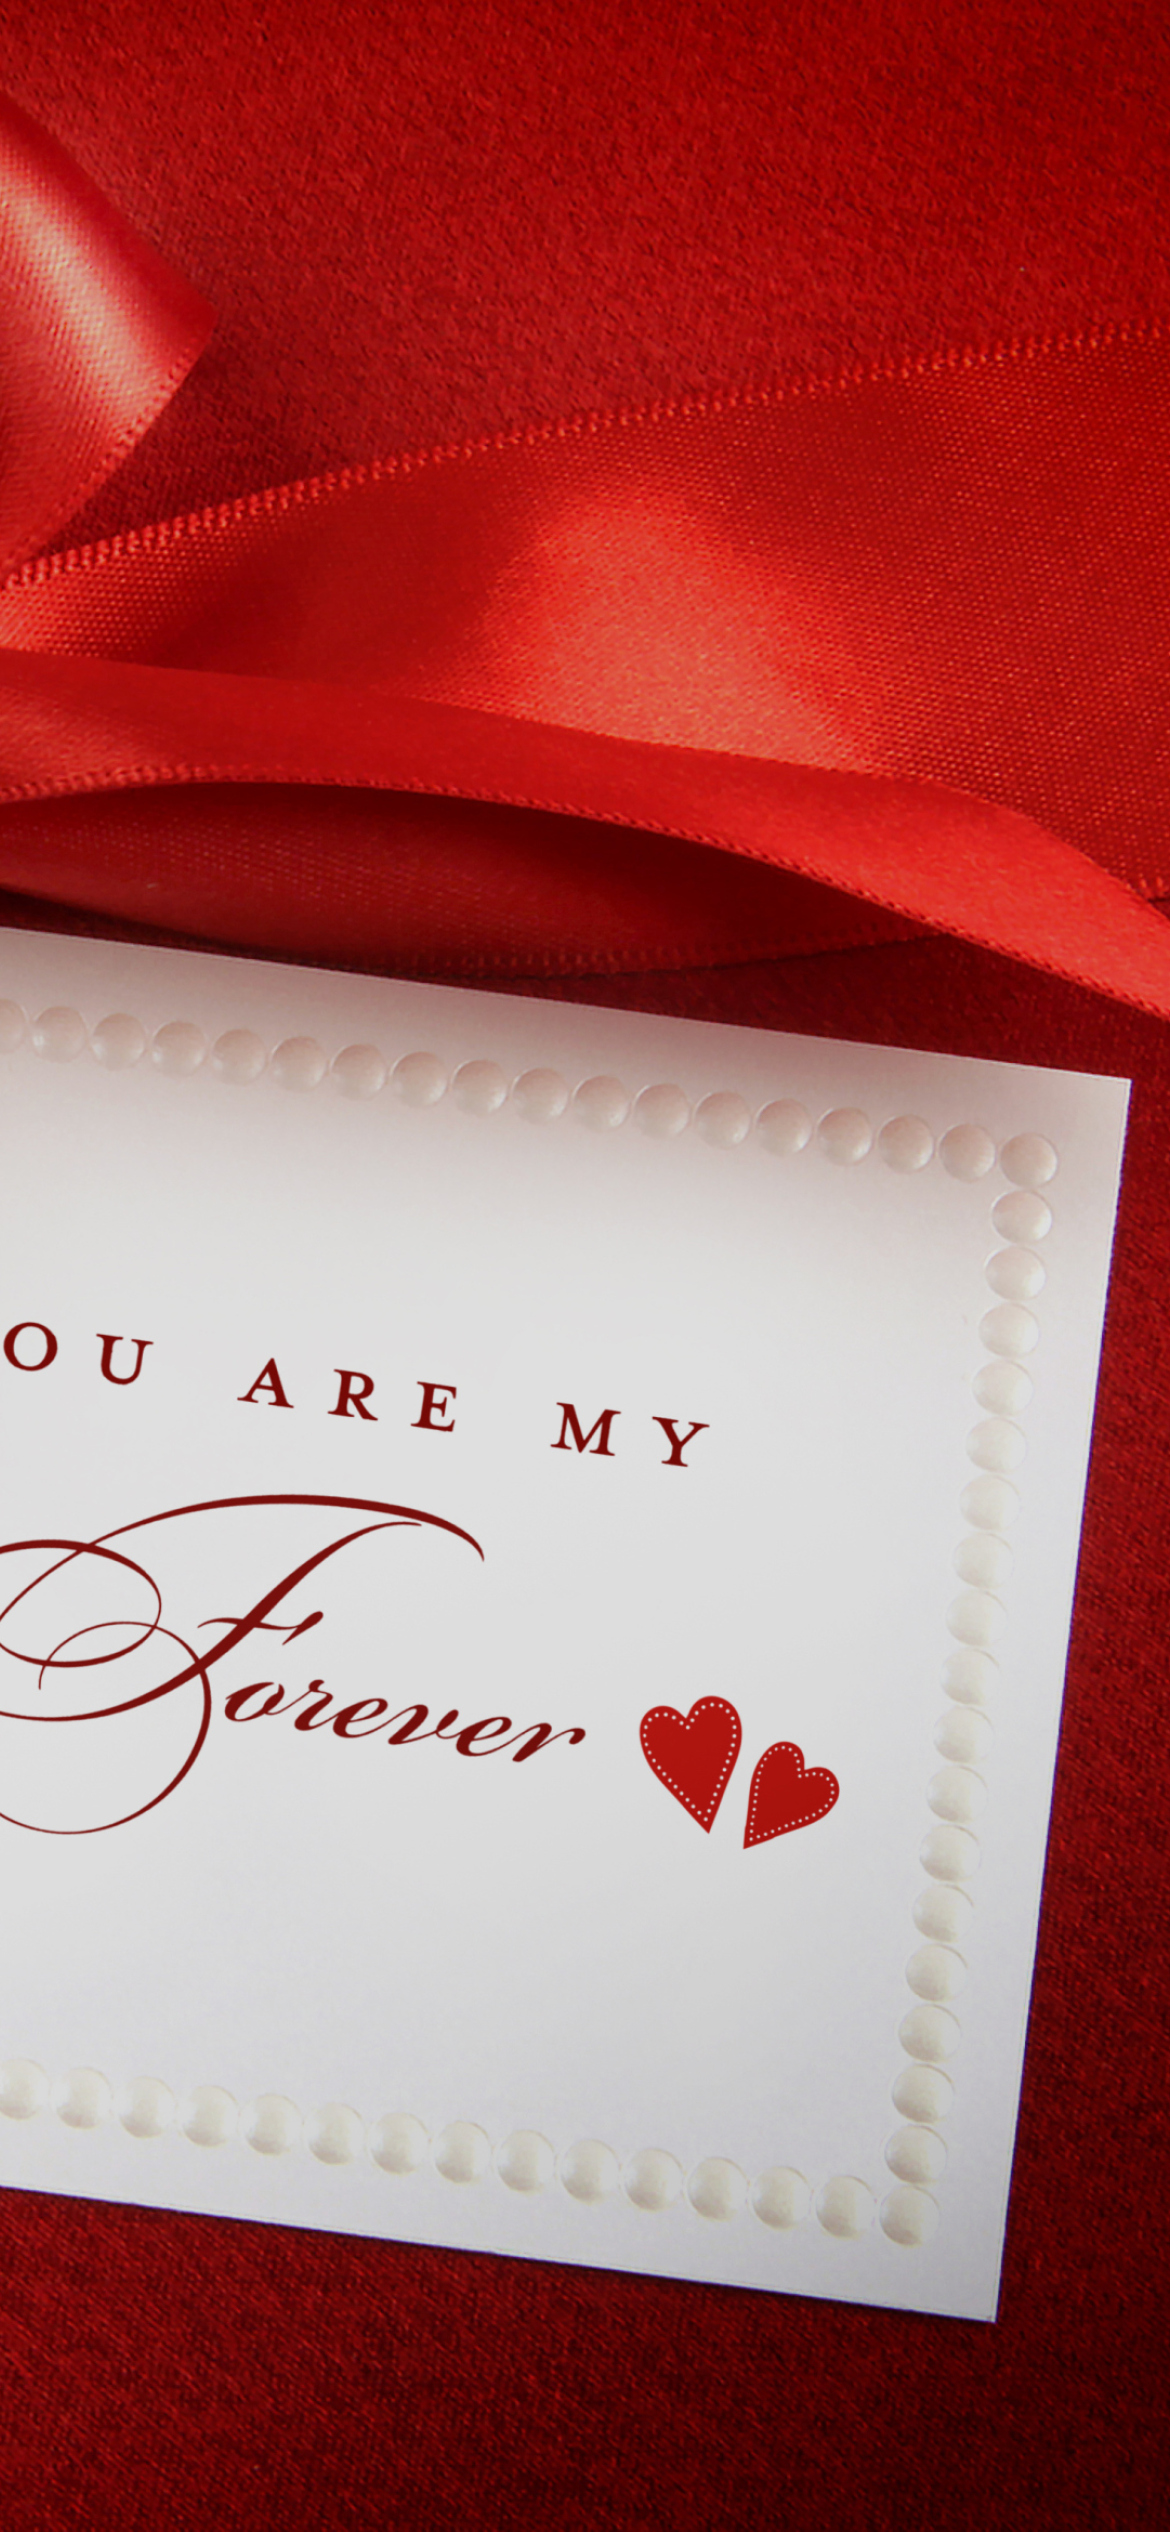 You Are My Forever wallpaper 1170x2532